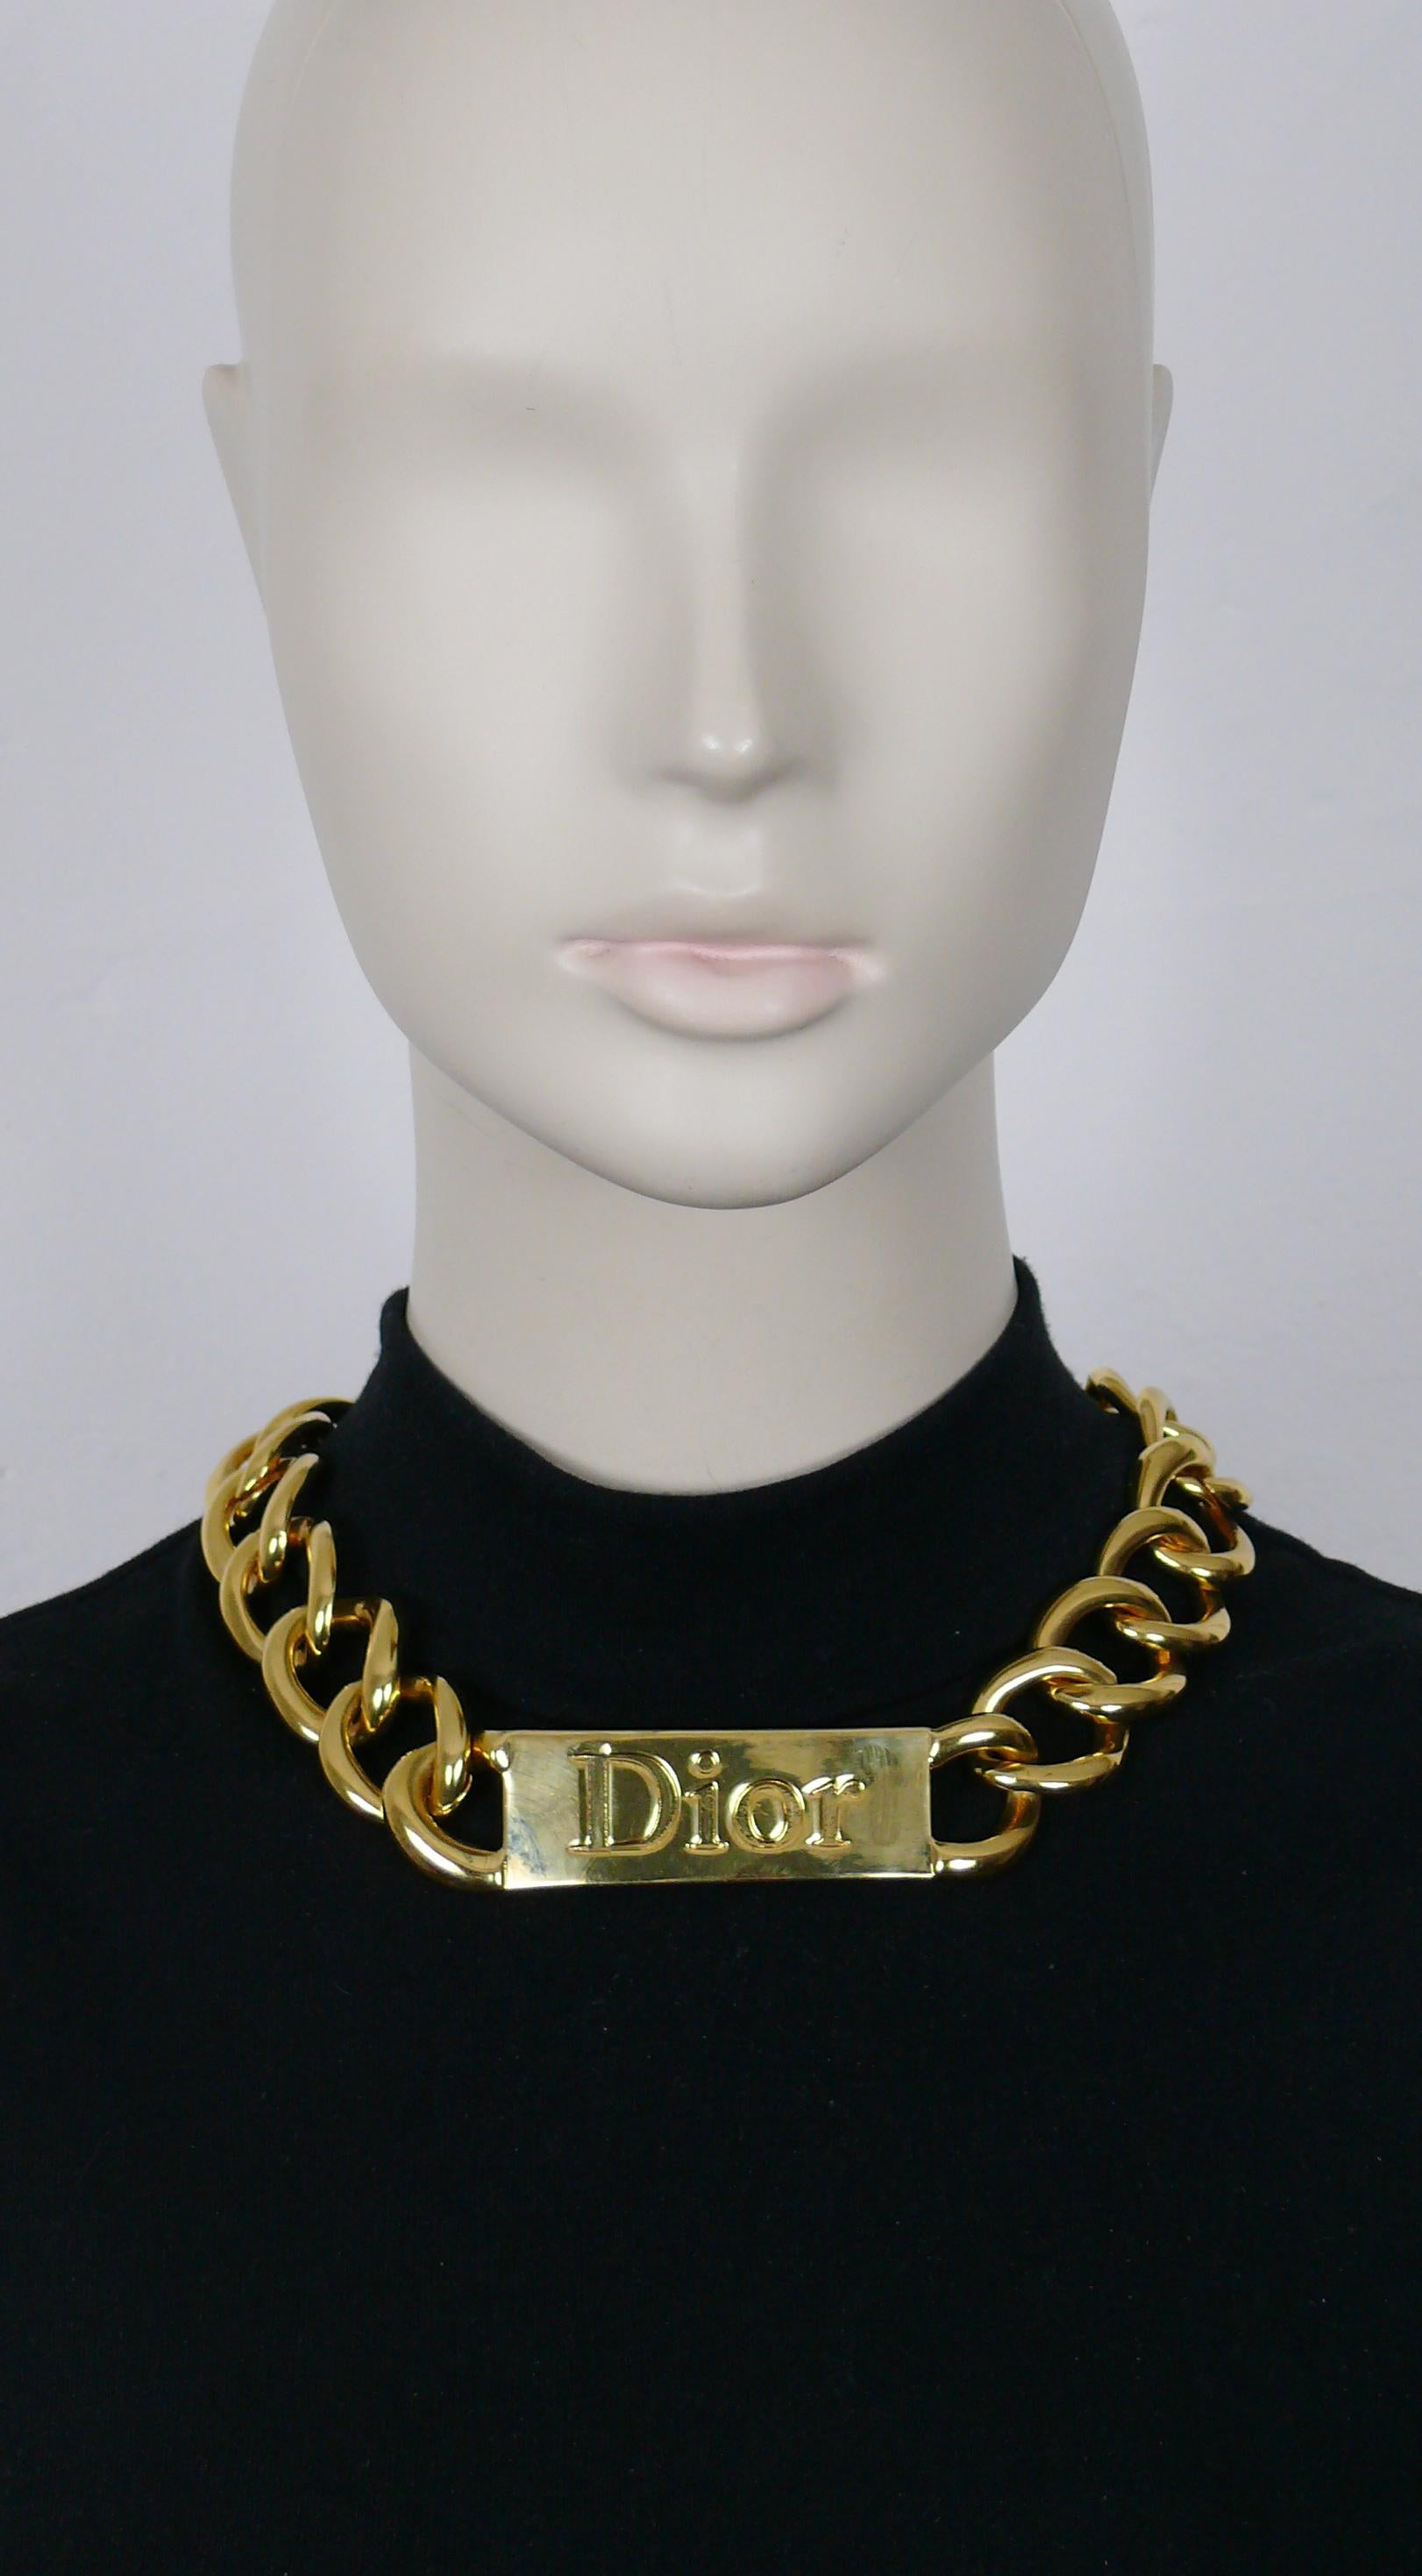 CHRISTIAN DIOR by JOHN GALLIANO chunky gold tone curb chain necklace featuring a massive ID tag embossed DIOR.

From the CHRISTIAN DIOR Fall/Winter Ready-to-Wear Collection.
As seen on the runway (see pictures 4 and 5).

Hook and toggle